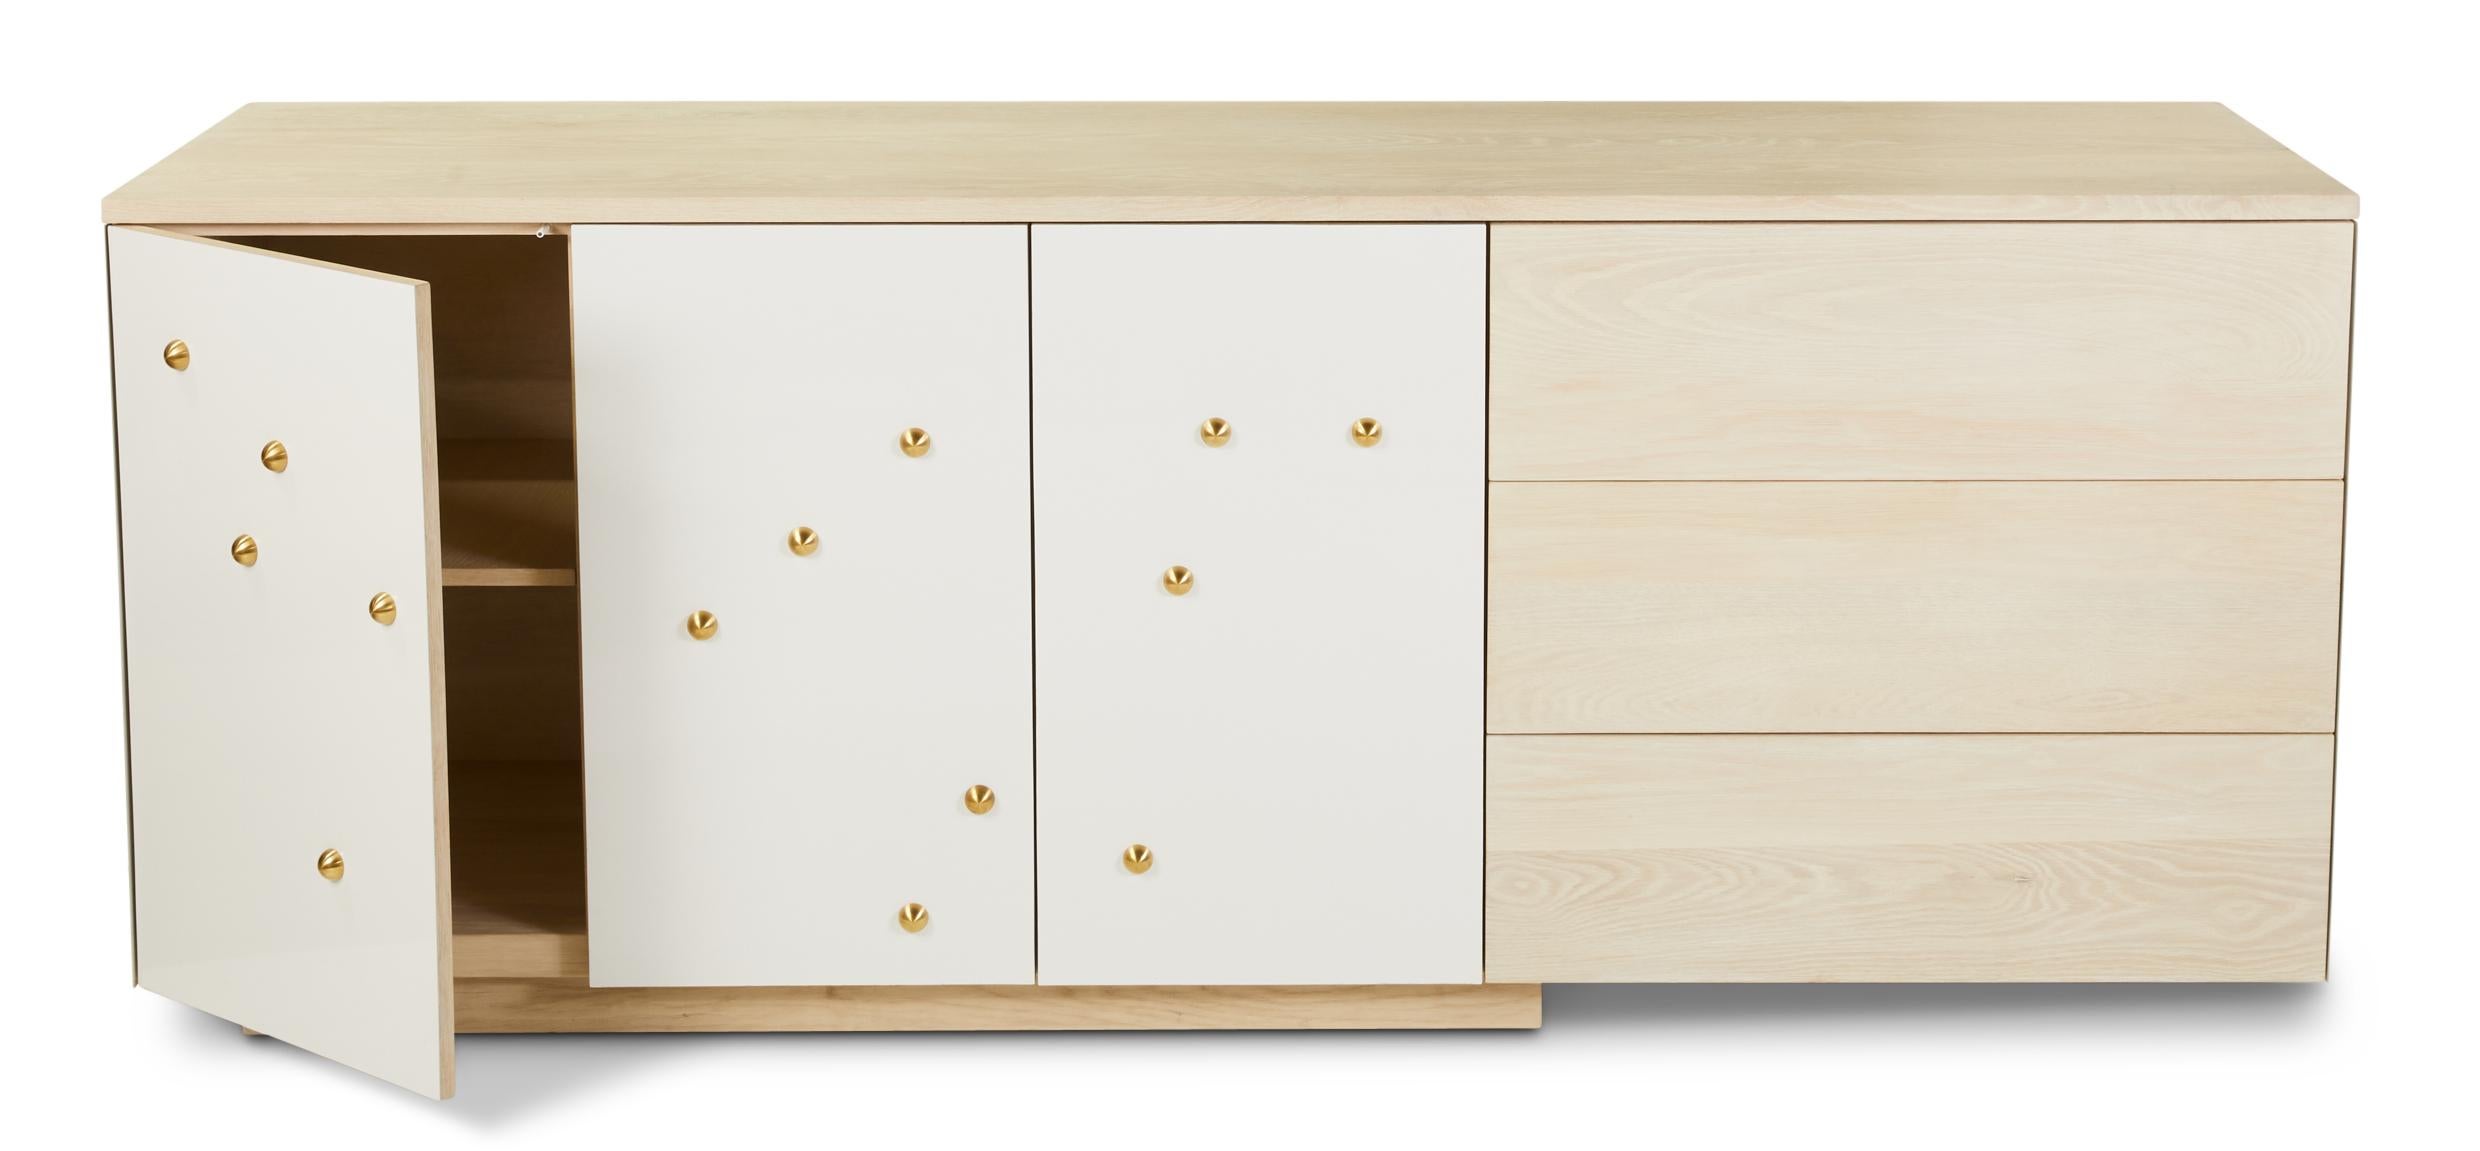 Aluminum C-210WB Solid White Oak and Powder-Coated Cantilevered Credenza with Brass Knobs For Sale